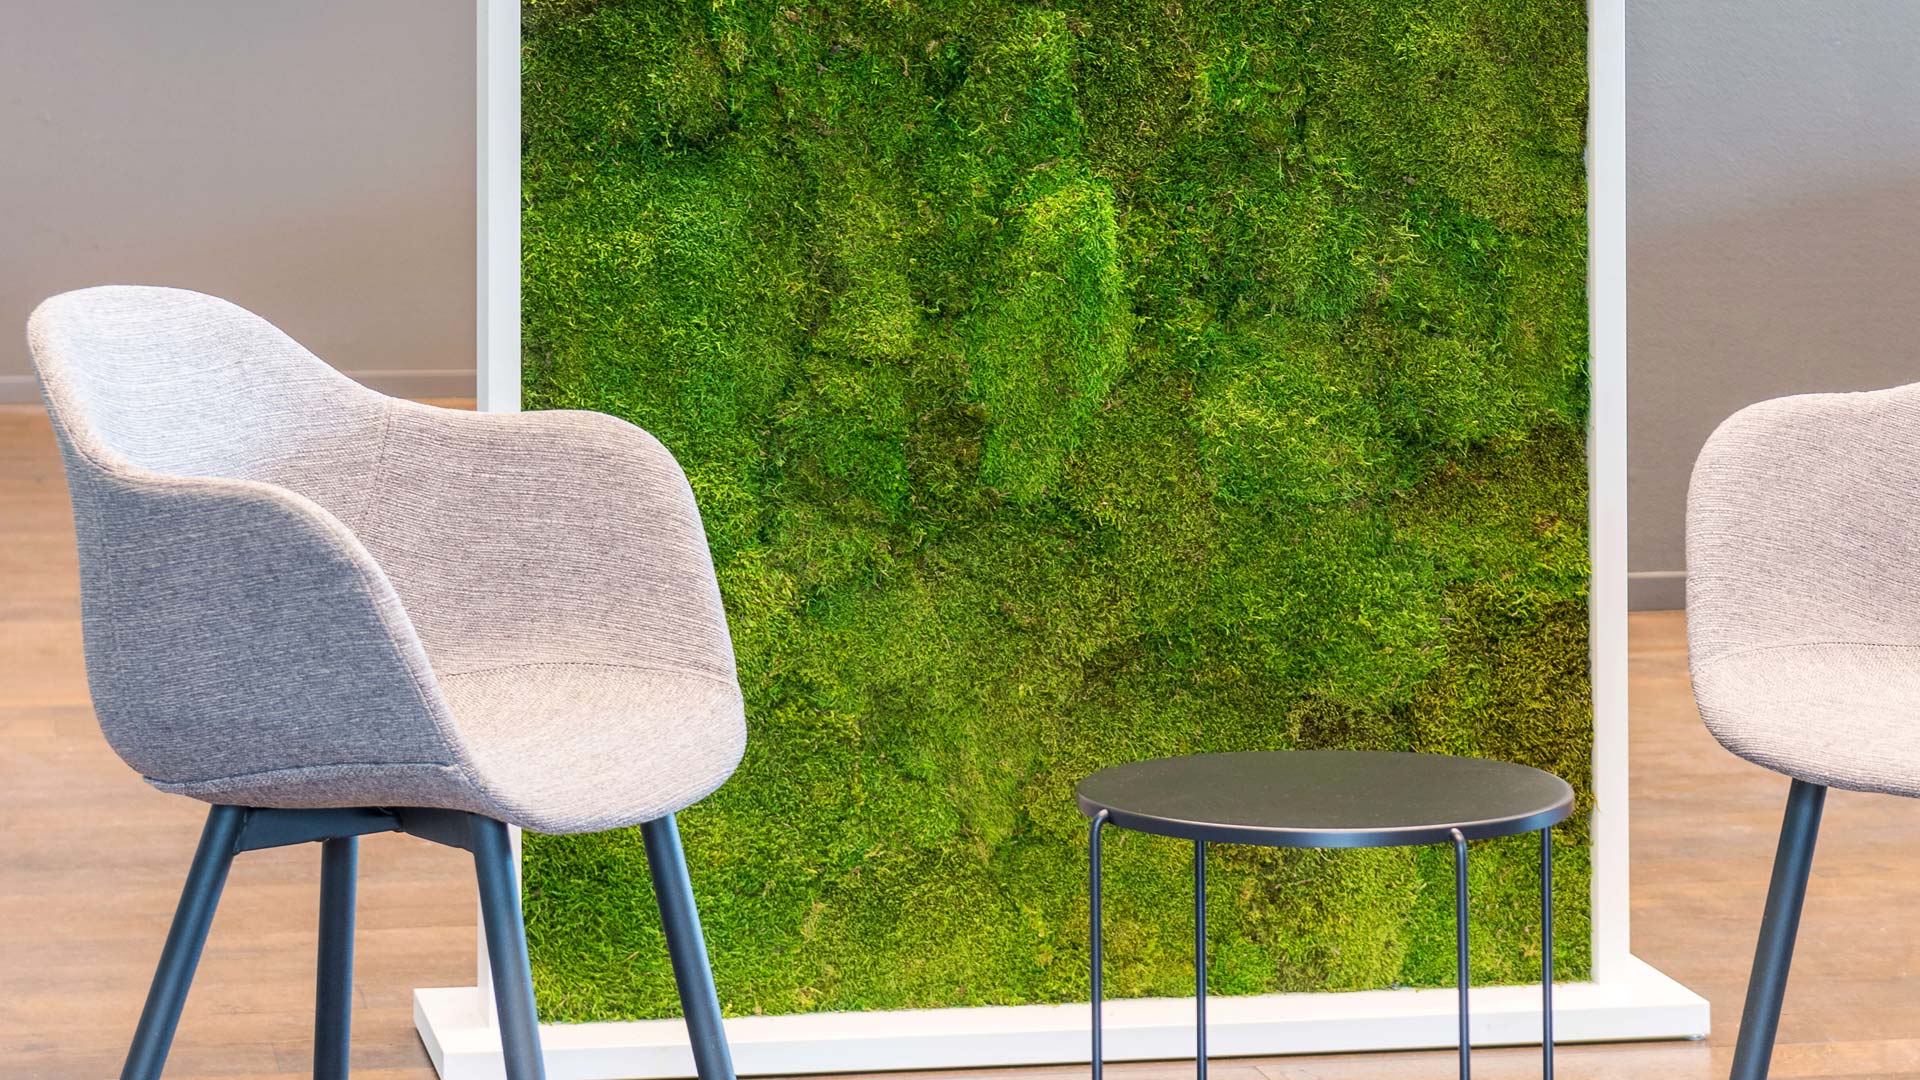 Double-sided divider walls in stabilised lichen or moss